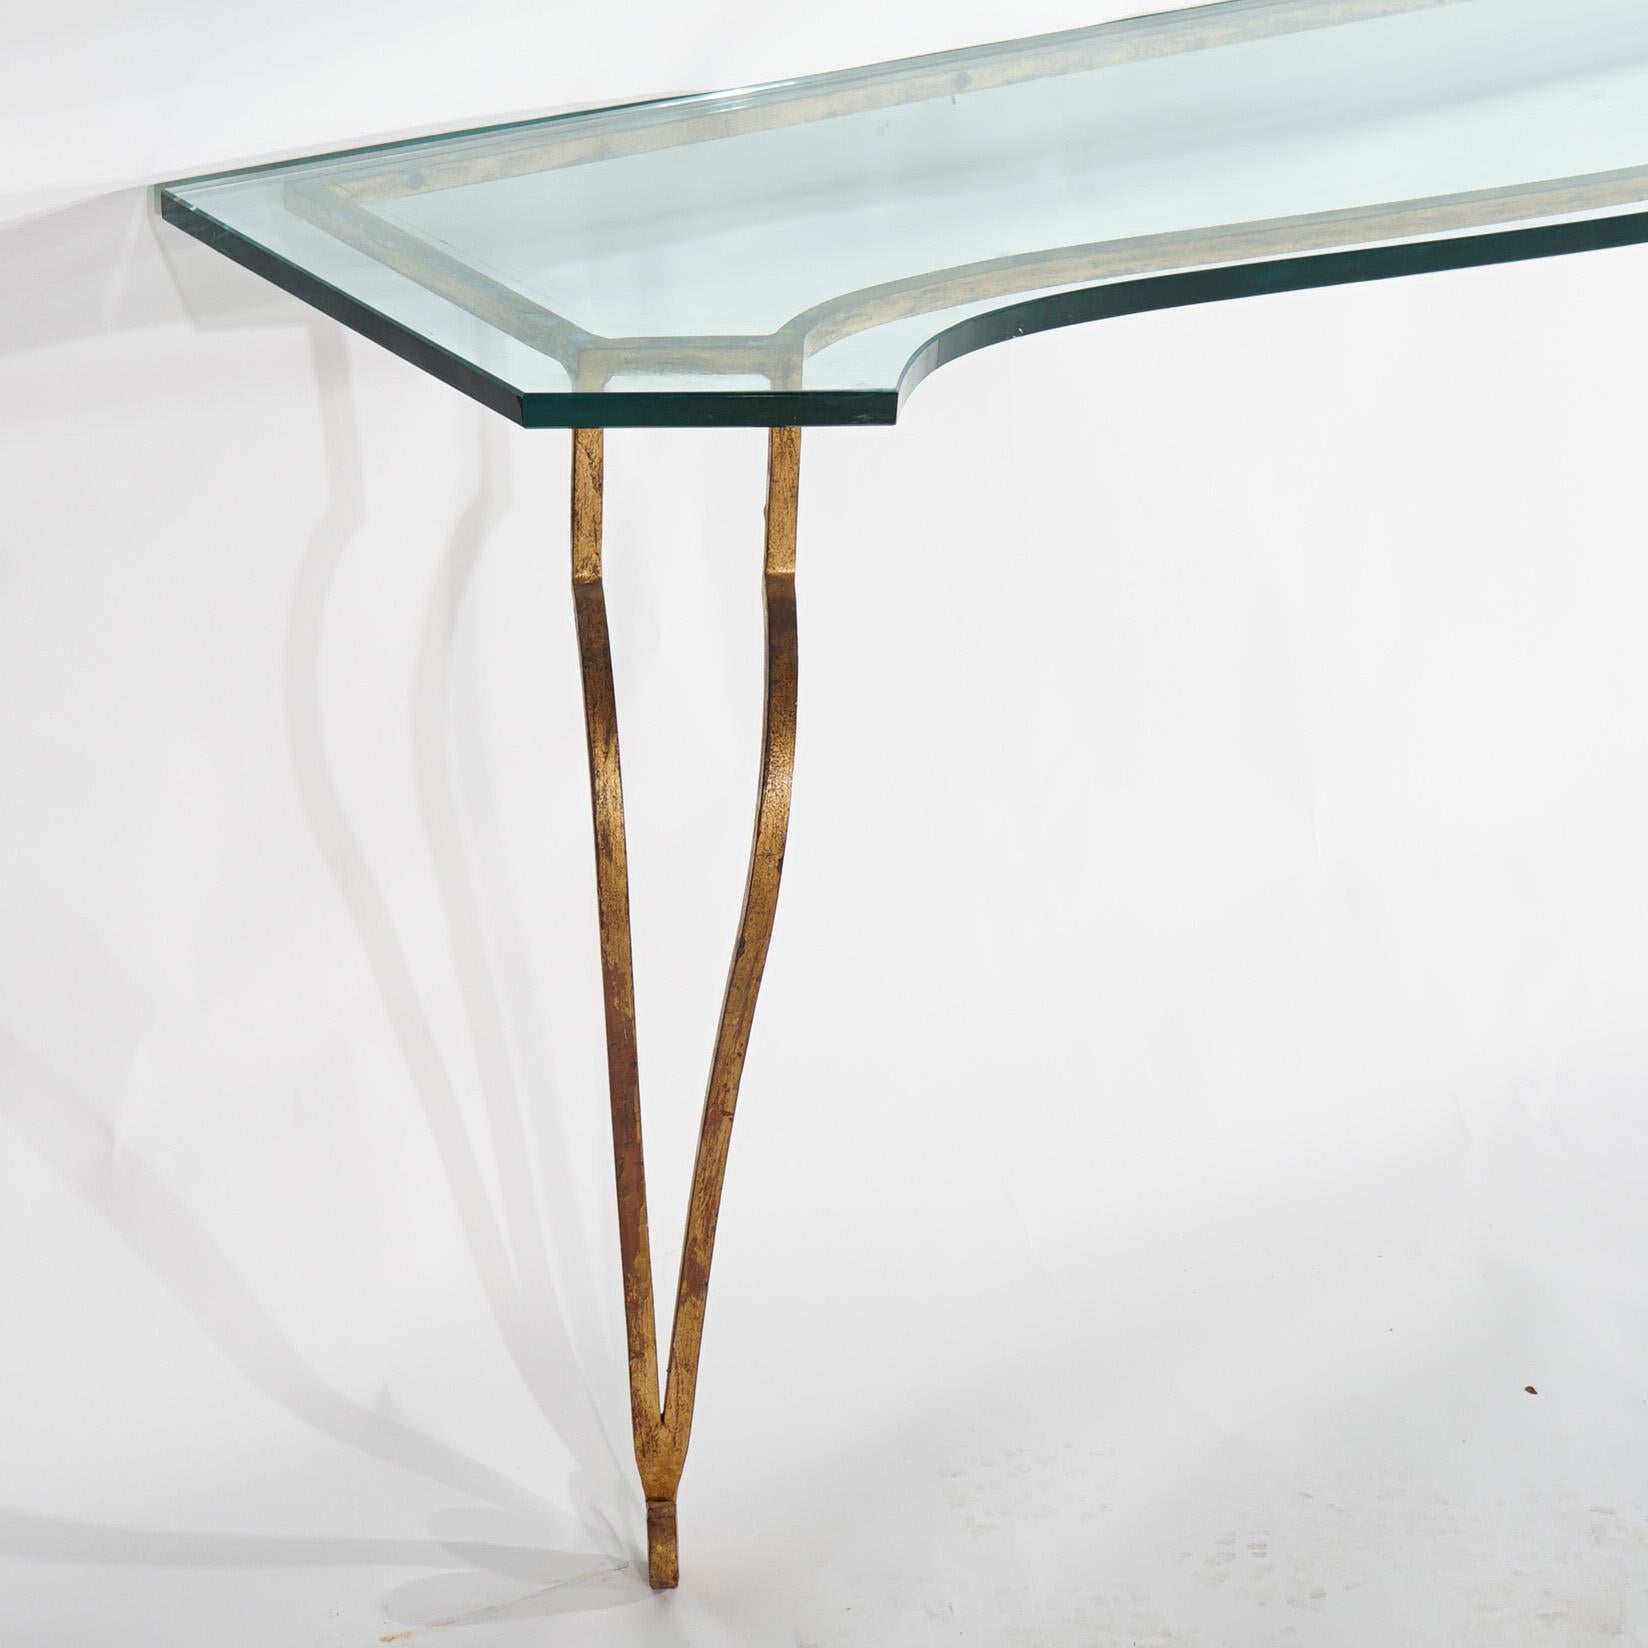 Italian Gold Gilt Wrought Iron Console Table with Glass Top 20th C For Sale 1